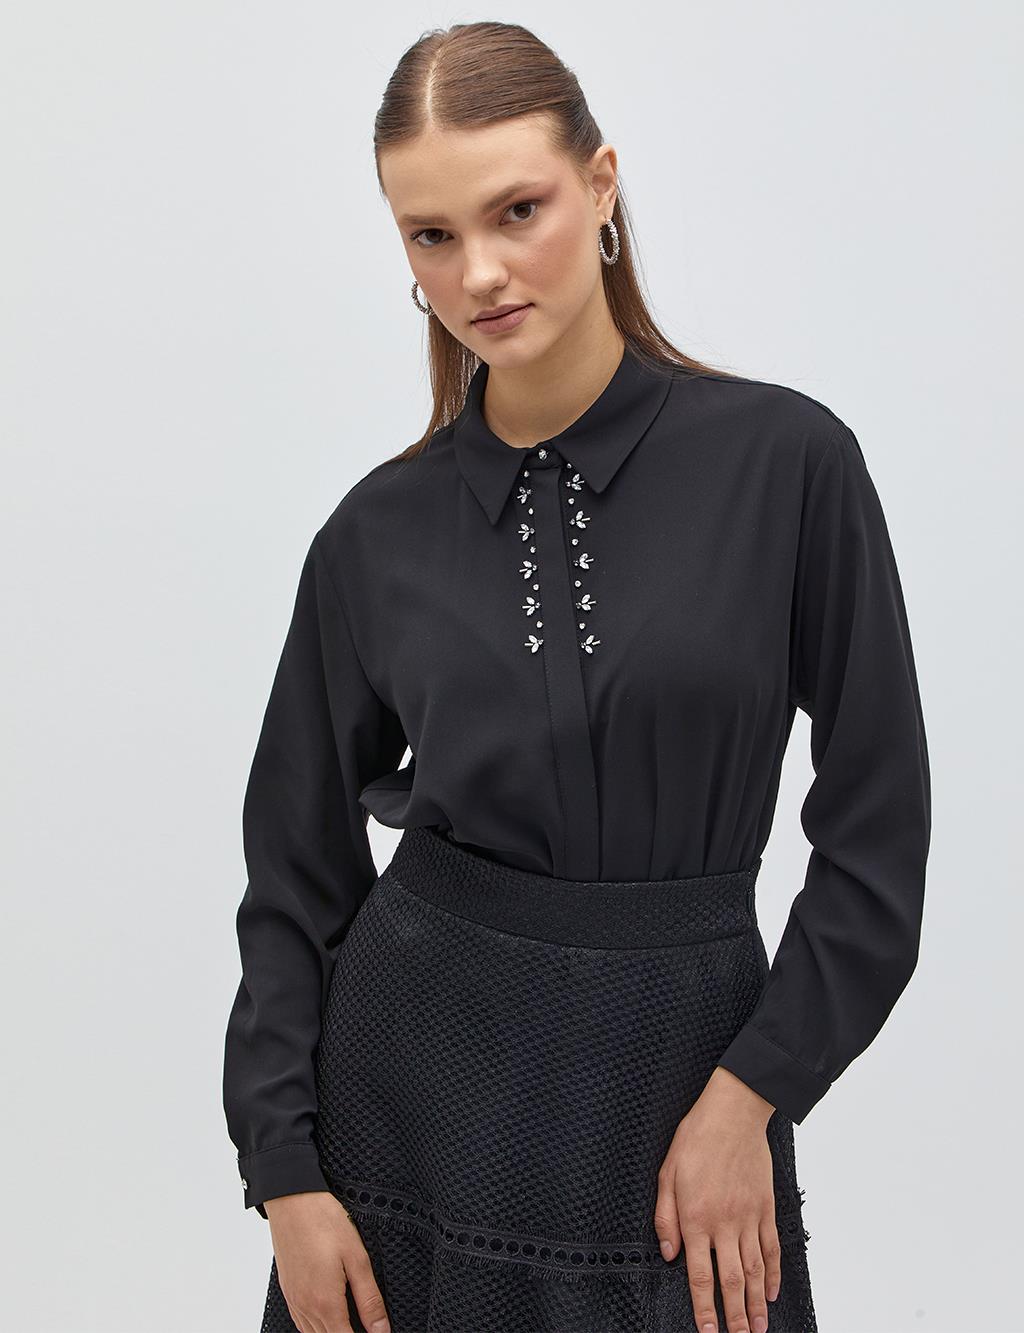 KYR Stone Embroidered Pati Concealed Shirt Black